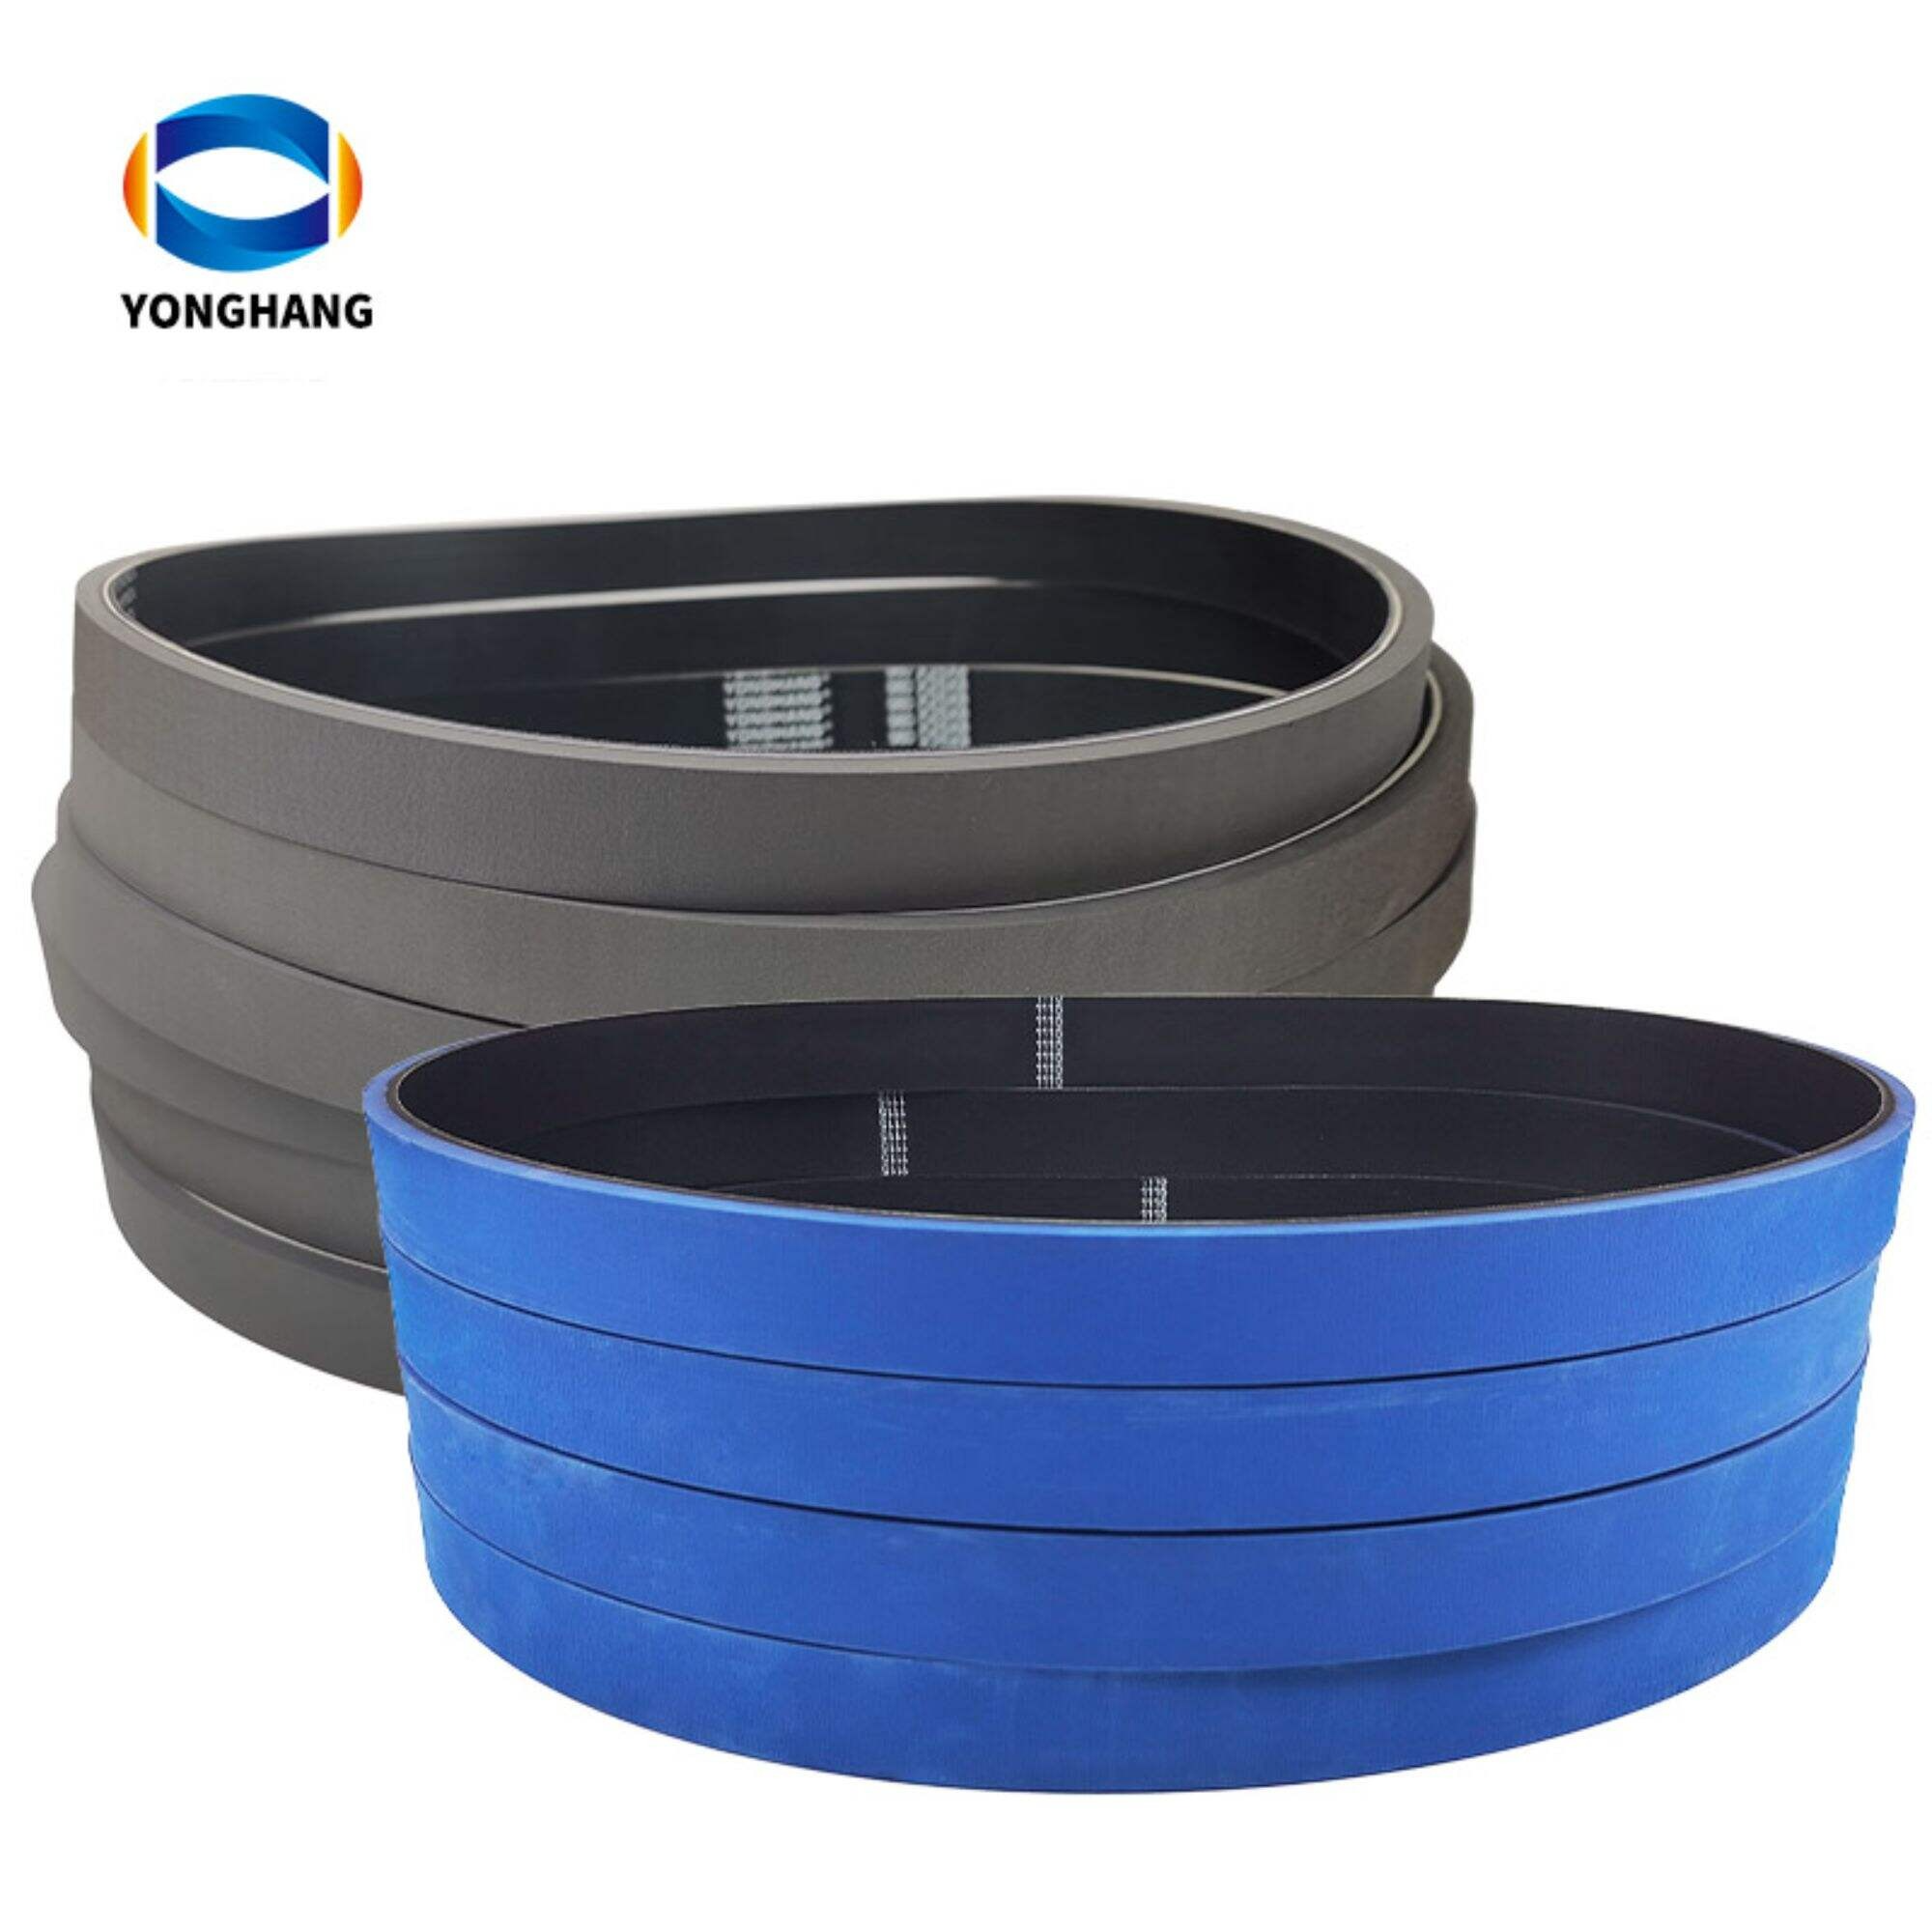 Yonghang Transmission's Folder Gluer Belts: Uncompromising Quality for Packaging Machinery